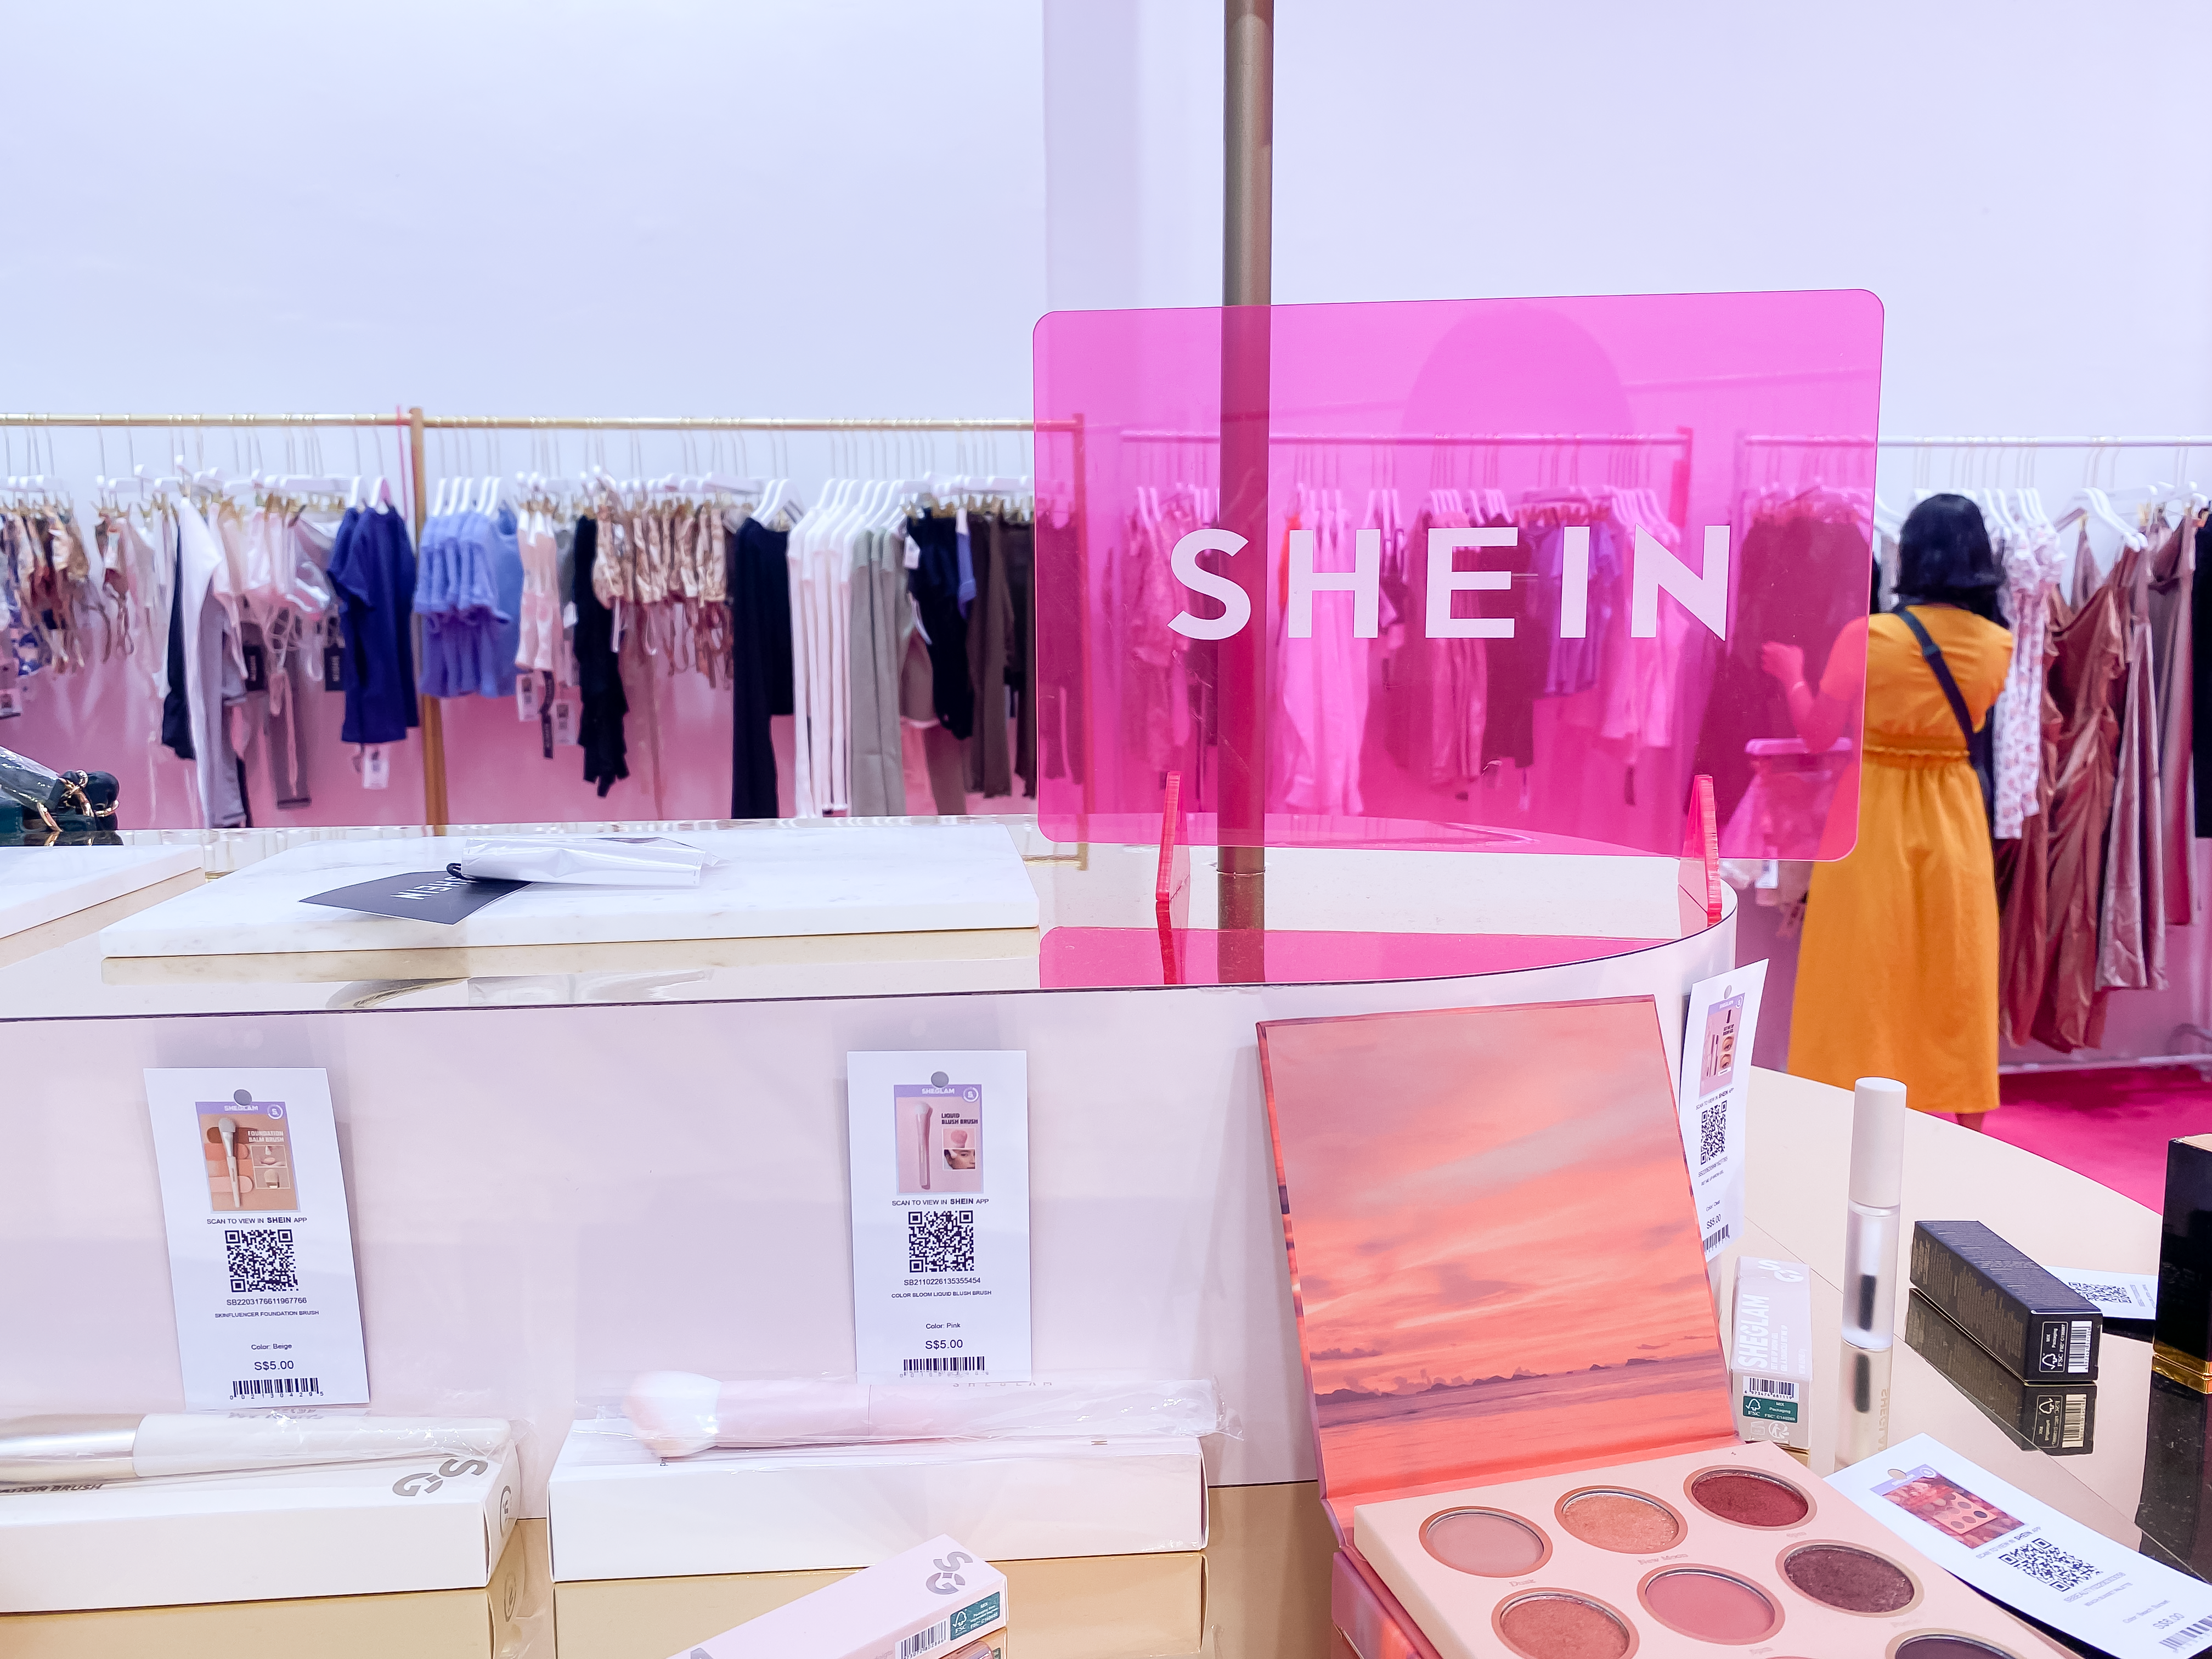 Shein Acquires Missguided Brand